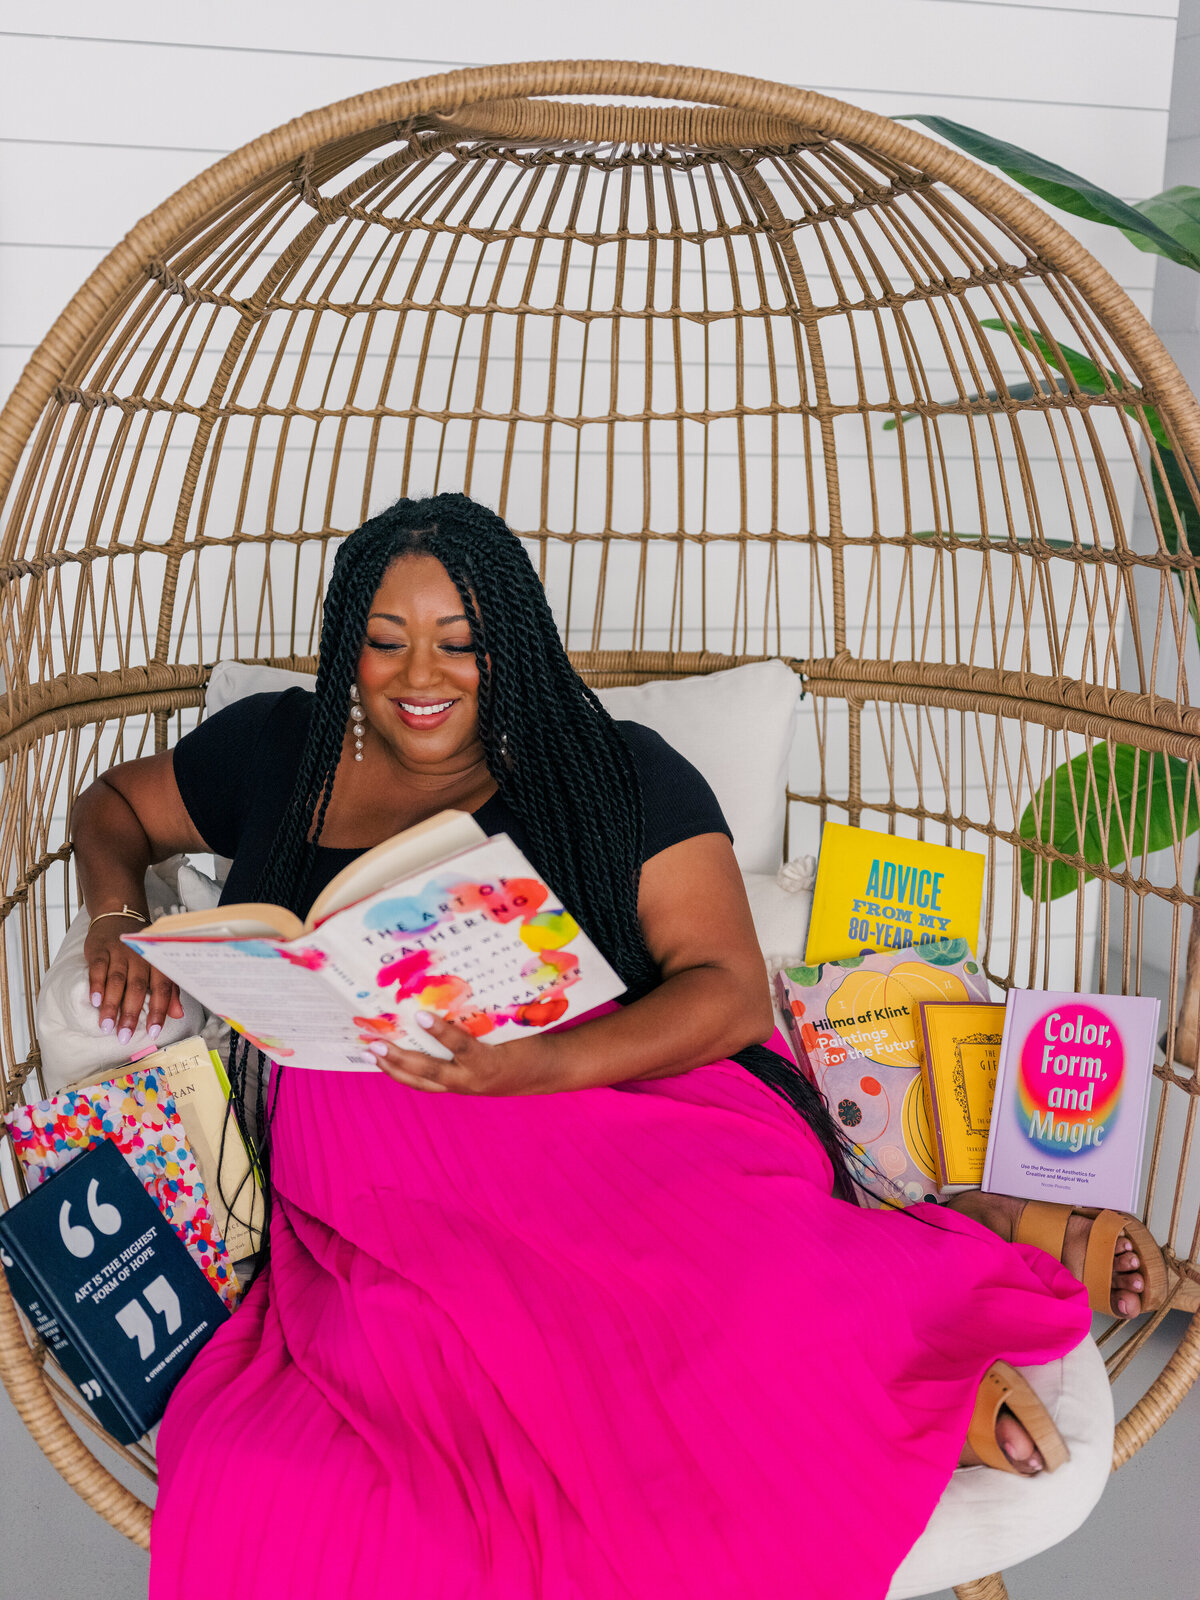 Woman business owner reading books in an egg chair